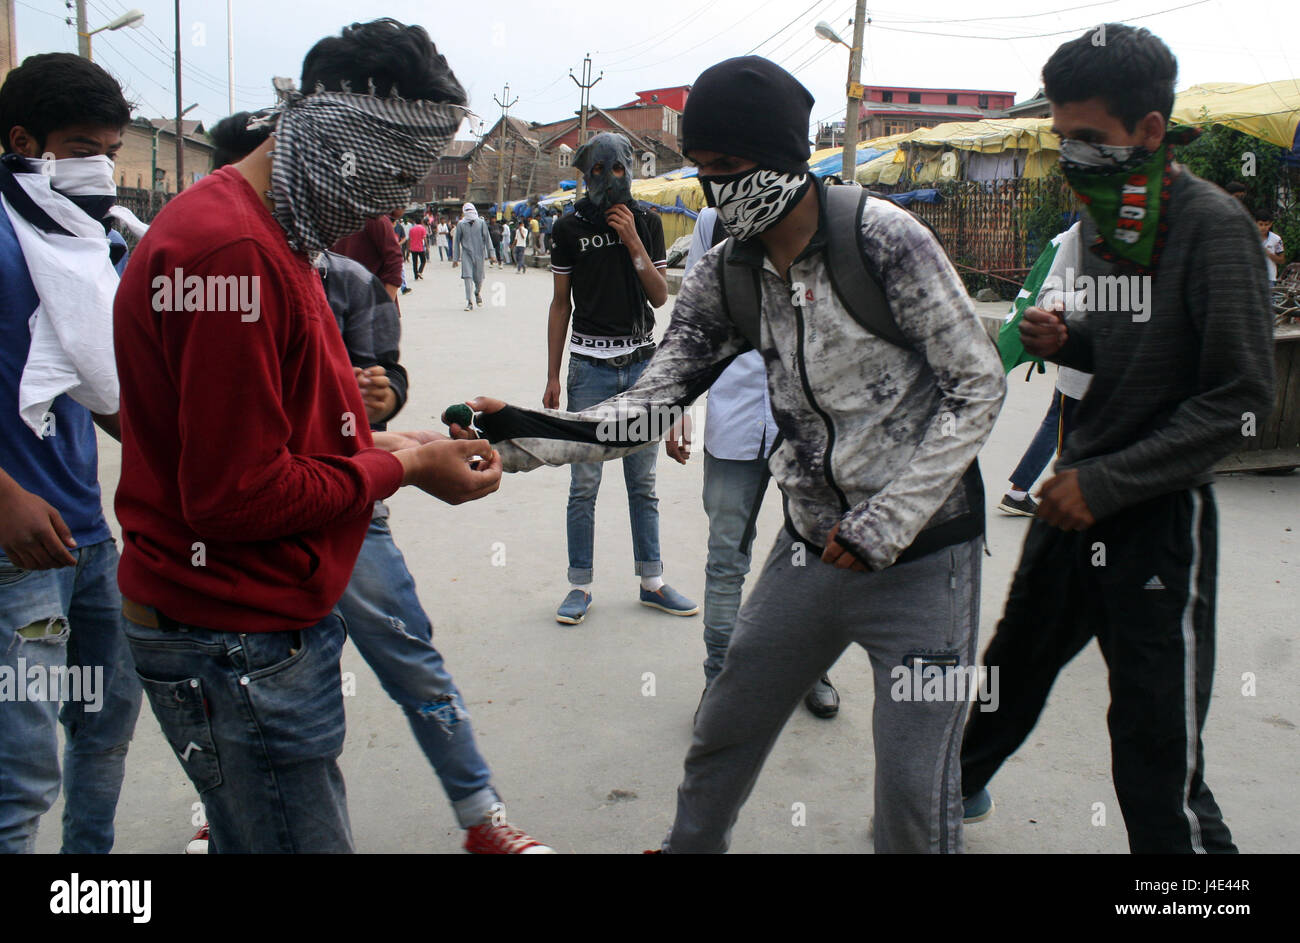 Srinagar, Kashmir. 12th May, 2017. Kashmiri protesters burn fire crackers before throwing at Indian police. Clashes broke out between protesters and security forces in downtown Nowhatta area of Srinagar. Groups of youth indulged in sloganeering and stone- pelting at Indian security forces soon after Friday congregational prayers. According to the report, 102 unarmed civilians were killed in 135 days of unrest that was sparked by the killing on July 8 of Hizbul Mujahideen commander Burhan Wani by the armed forces. Credit: sofi suhail/Alamy Live News Stock Photo